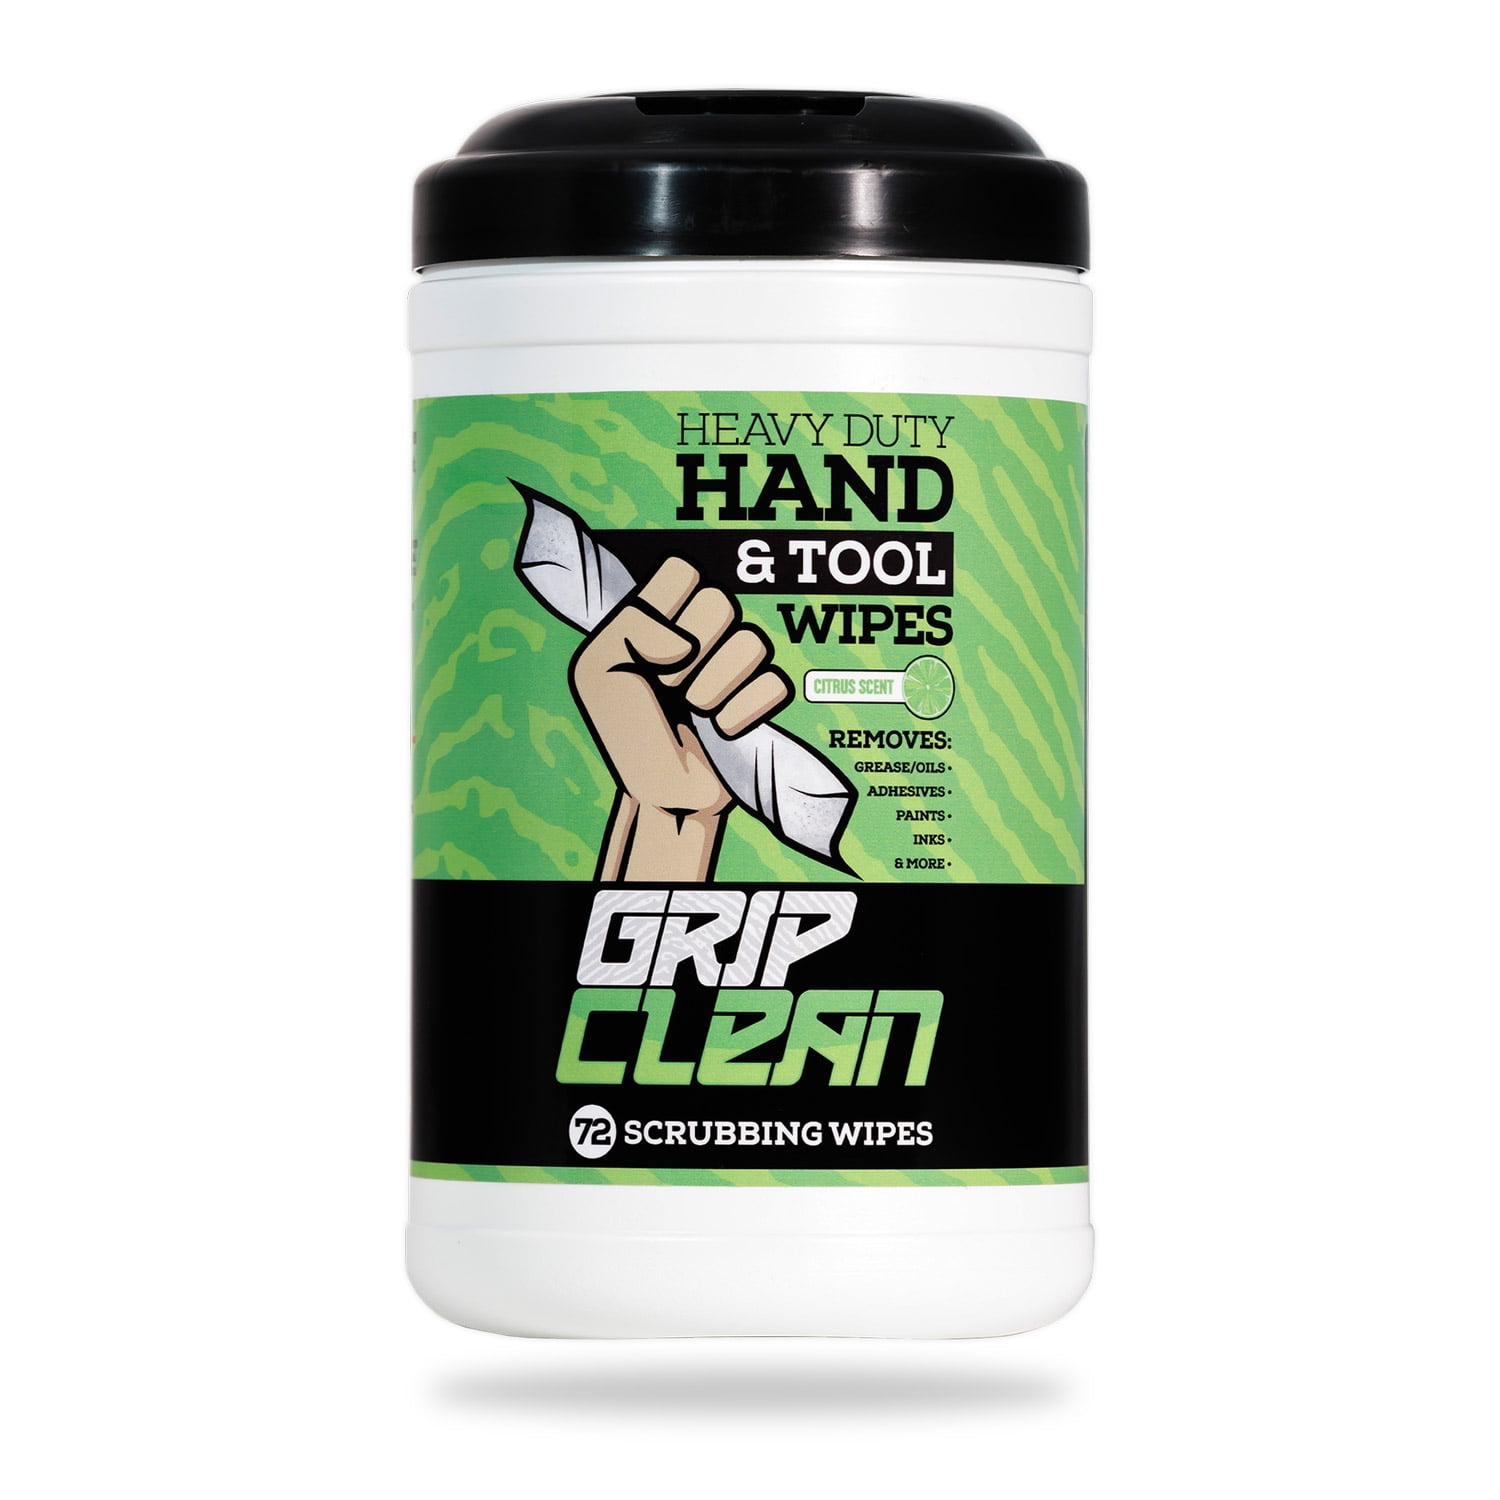 The Best Heavy Duty Hand Cleaner - Infused with DIRT?!? Mechanic